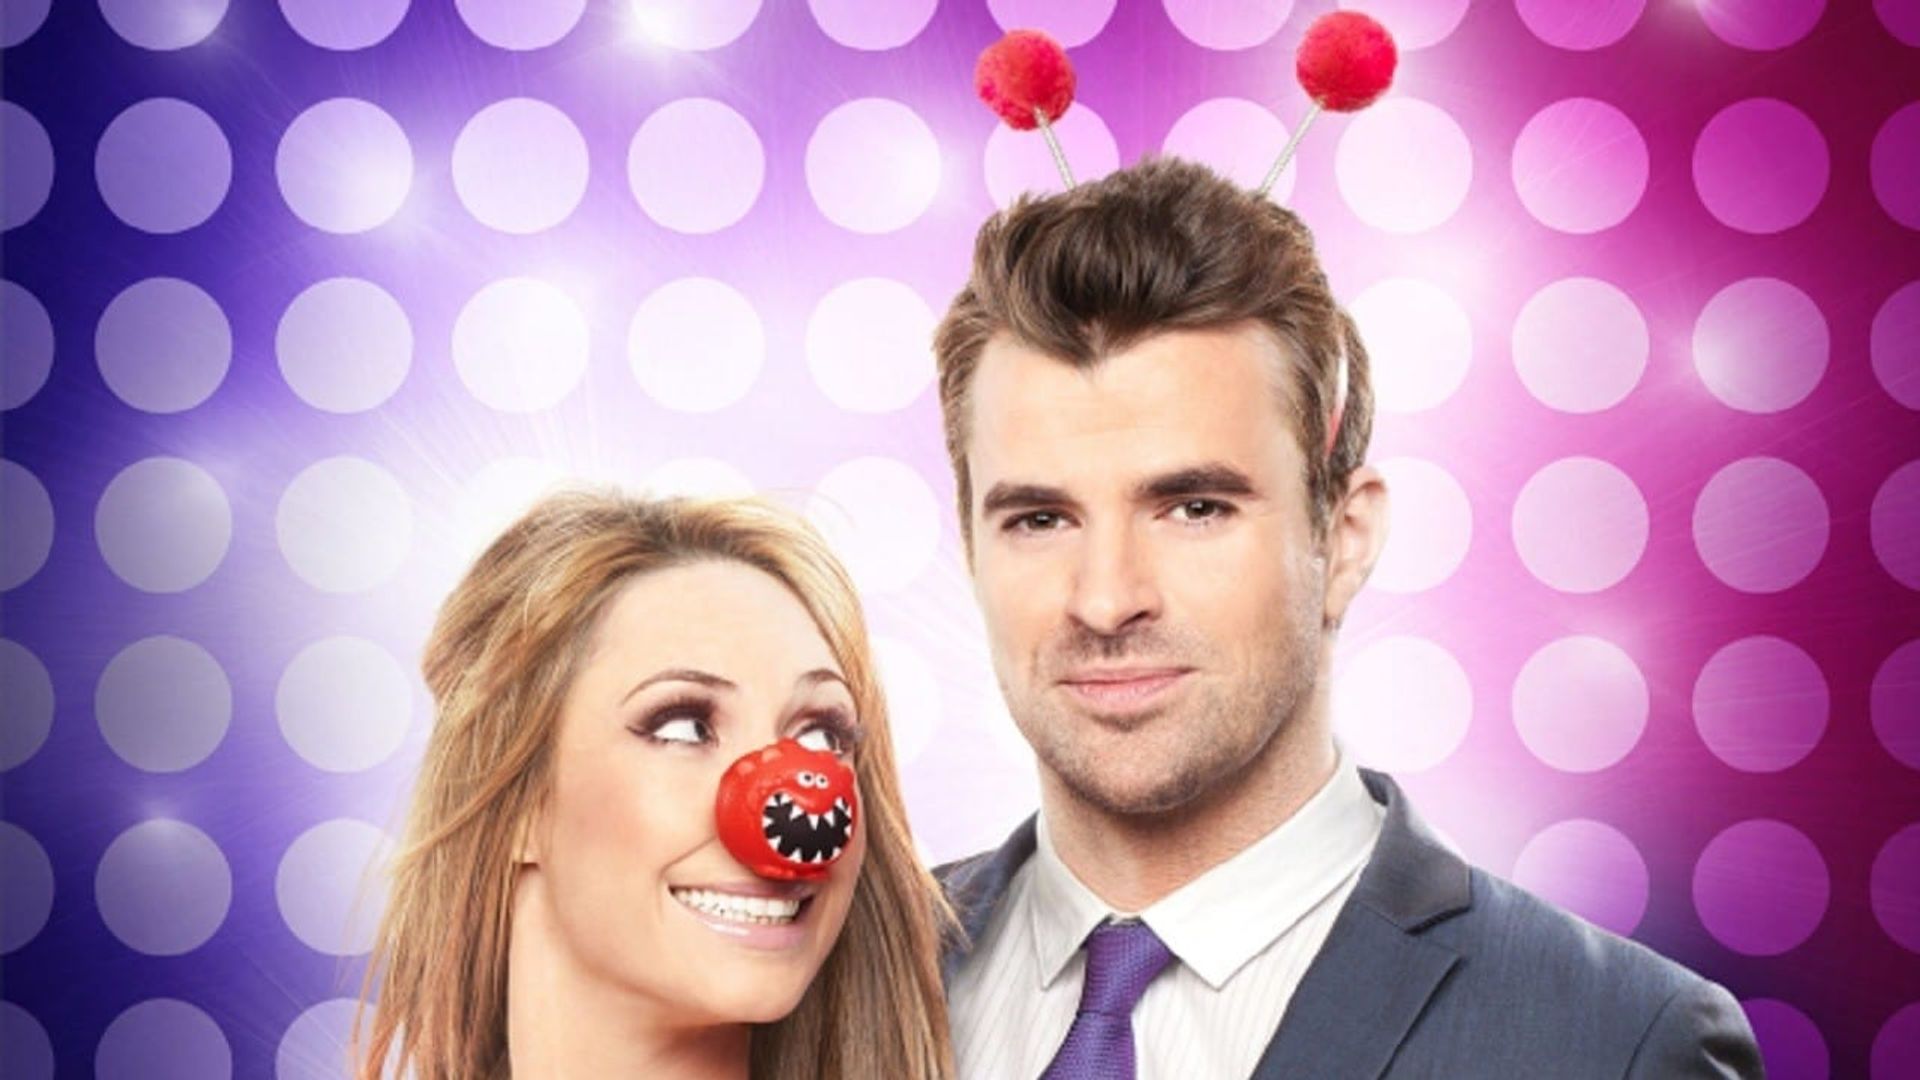 Let's Dance for Comic Relief background